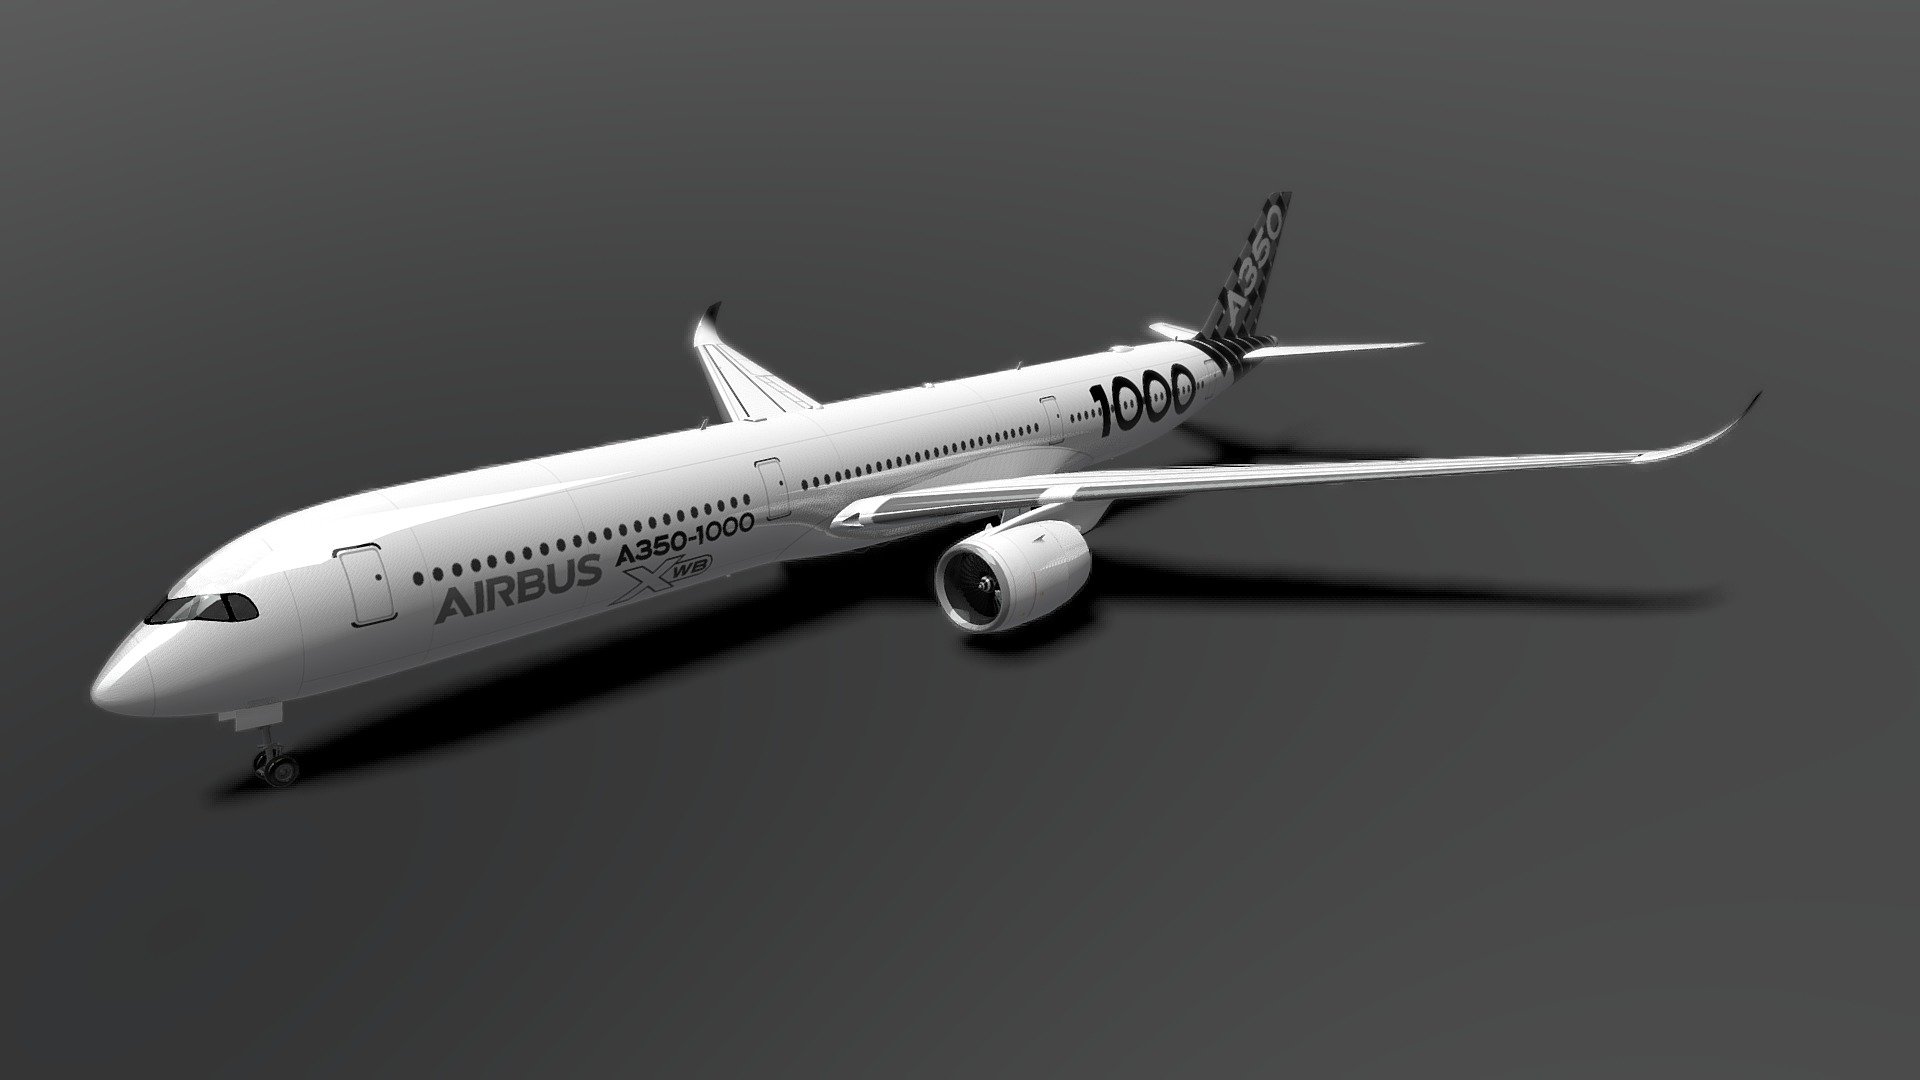 Aircraft:
Airbus A350-1000 For Geo-FS online flight simulator. Can be found under the CC (comunity contributed) tab. Is a constant WIP and has been updated many times. Latest update was: Jul/7/2021. new one----&gt; NEW a350-1000

Texture: 
1. 5000×5000 pixels 300ppi
2. Clean UV map - Airbus XWB A350-1000 - 3D model by Nightshade3325 3d model